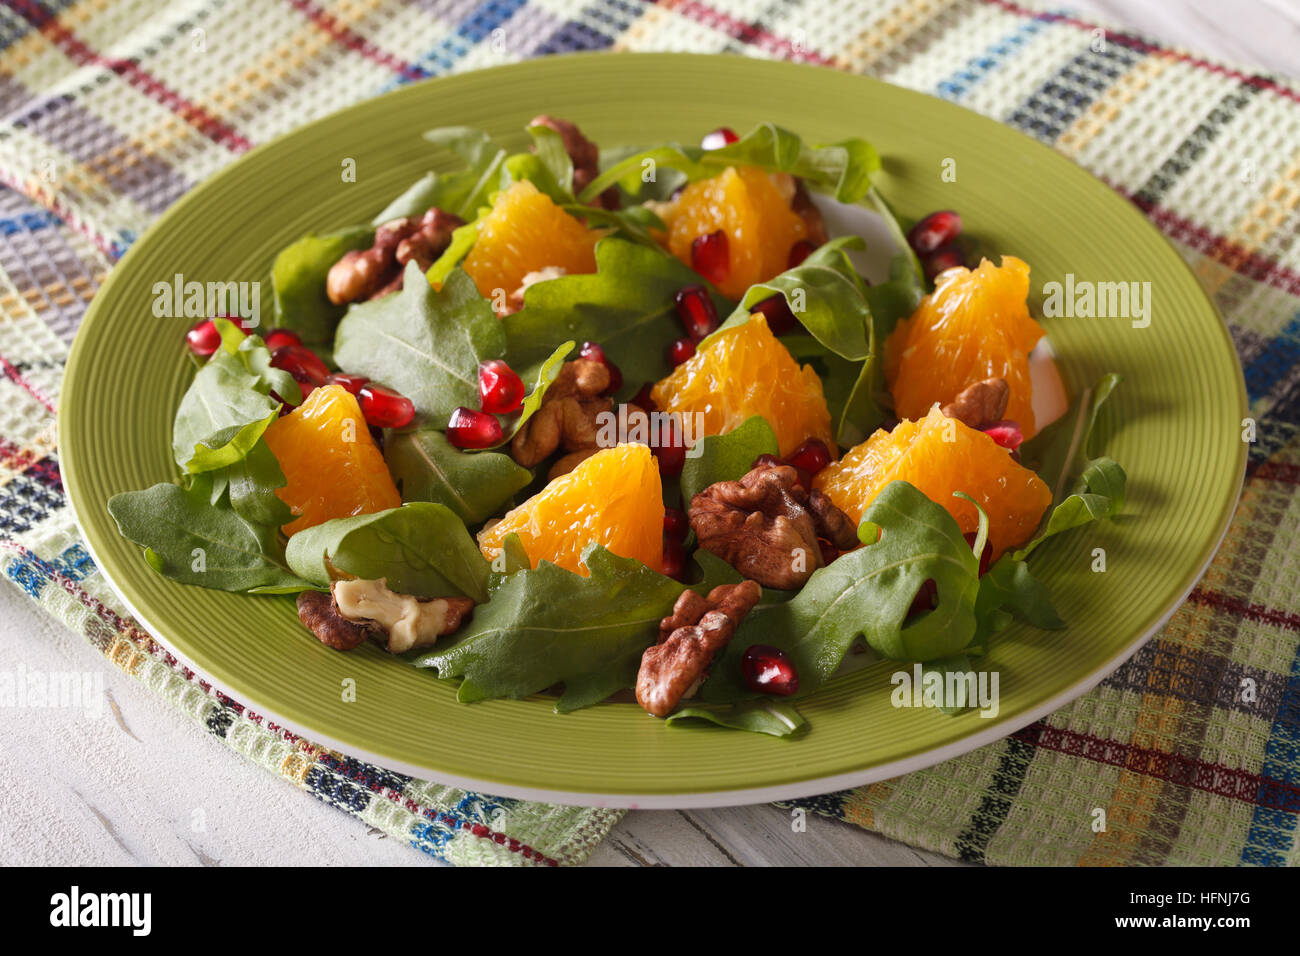 Delicious salad with pomegranate, oranges, walnuts and arugula close-up on the table. horizontal Stock Photo